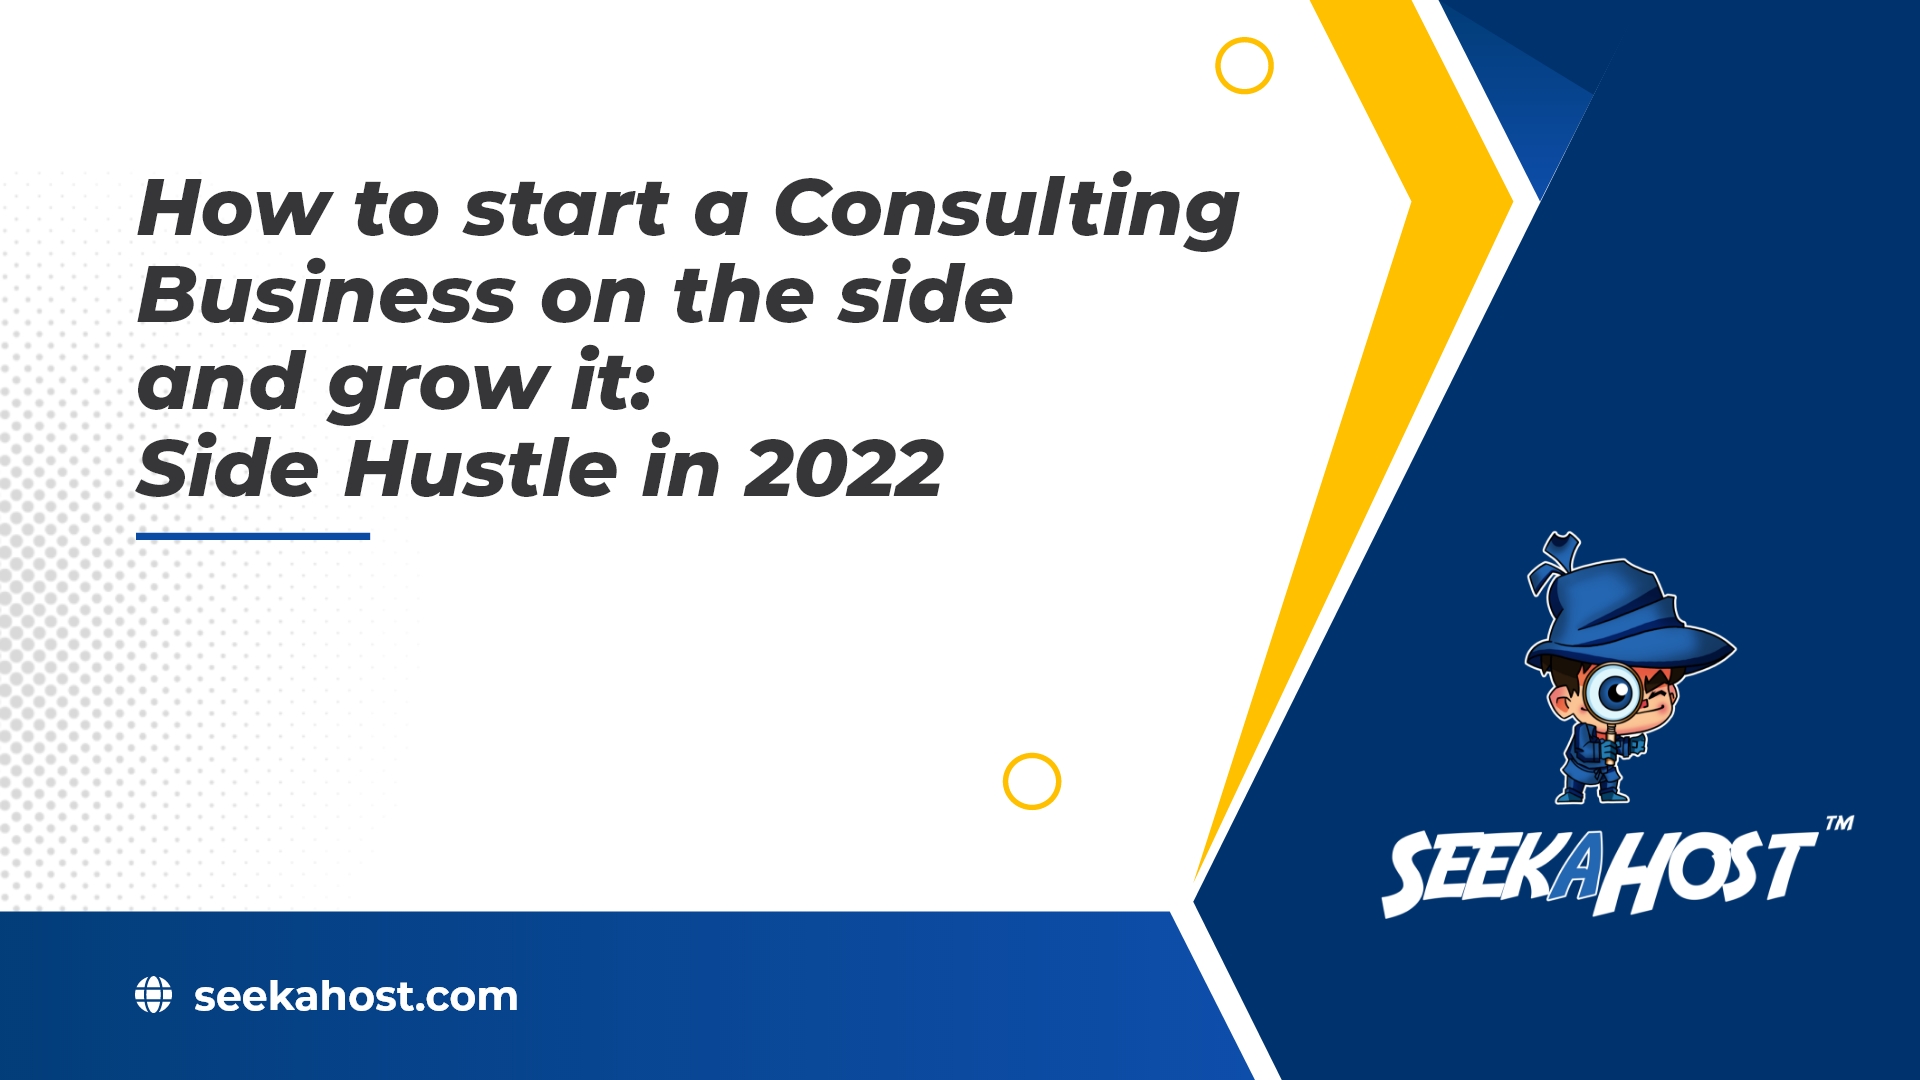 how-to-start-a-consulting-business-on-the-side-and-grow-it:-side-hustle-in-2022